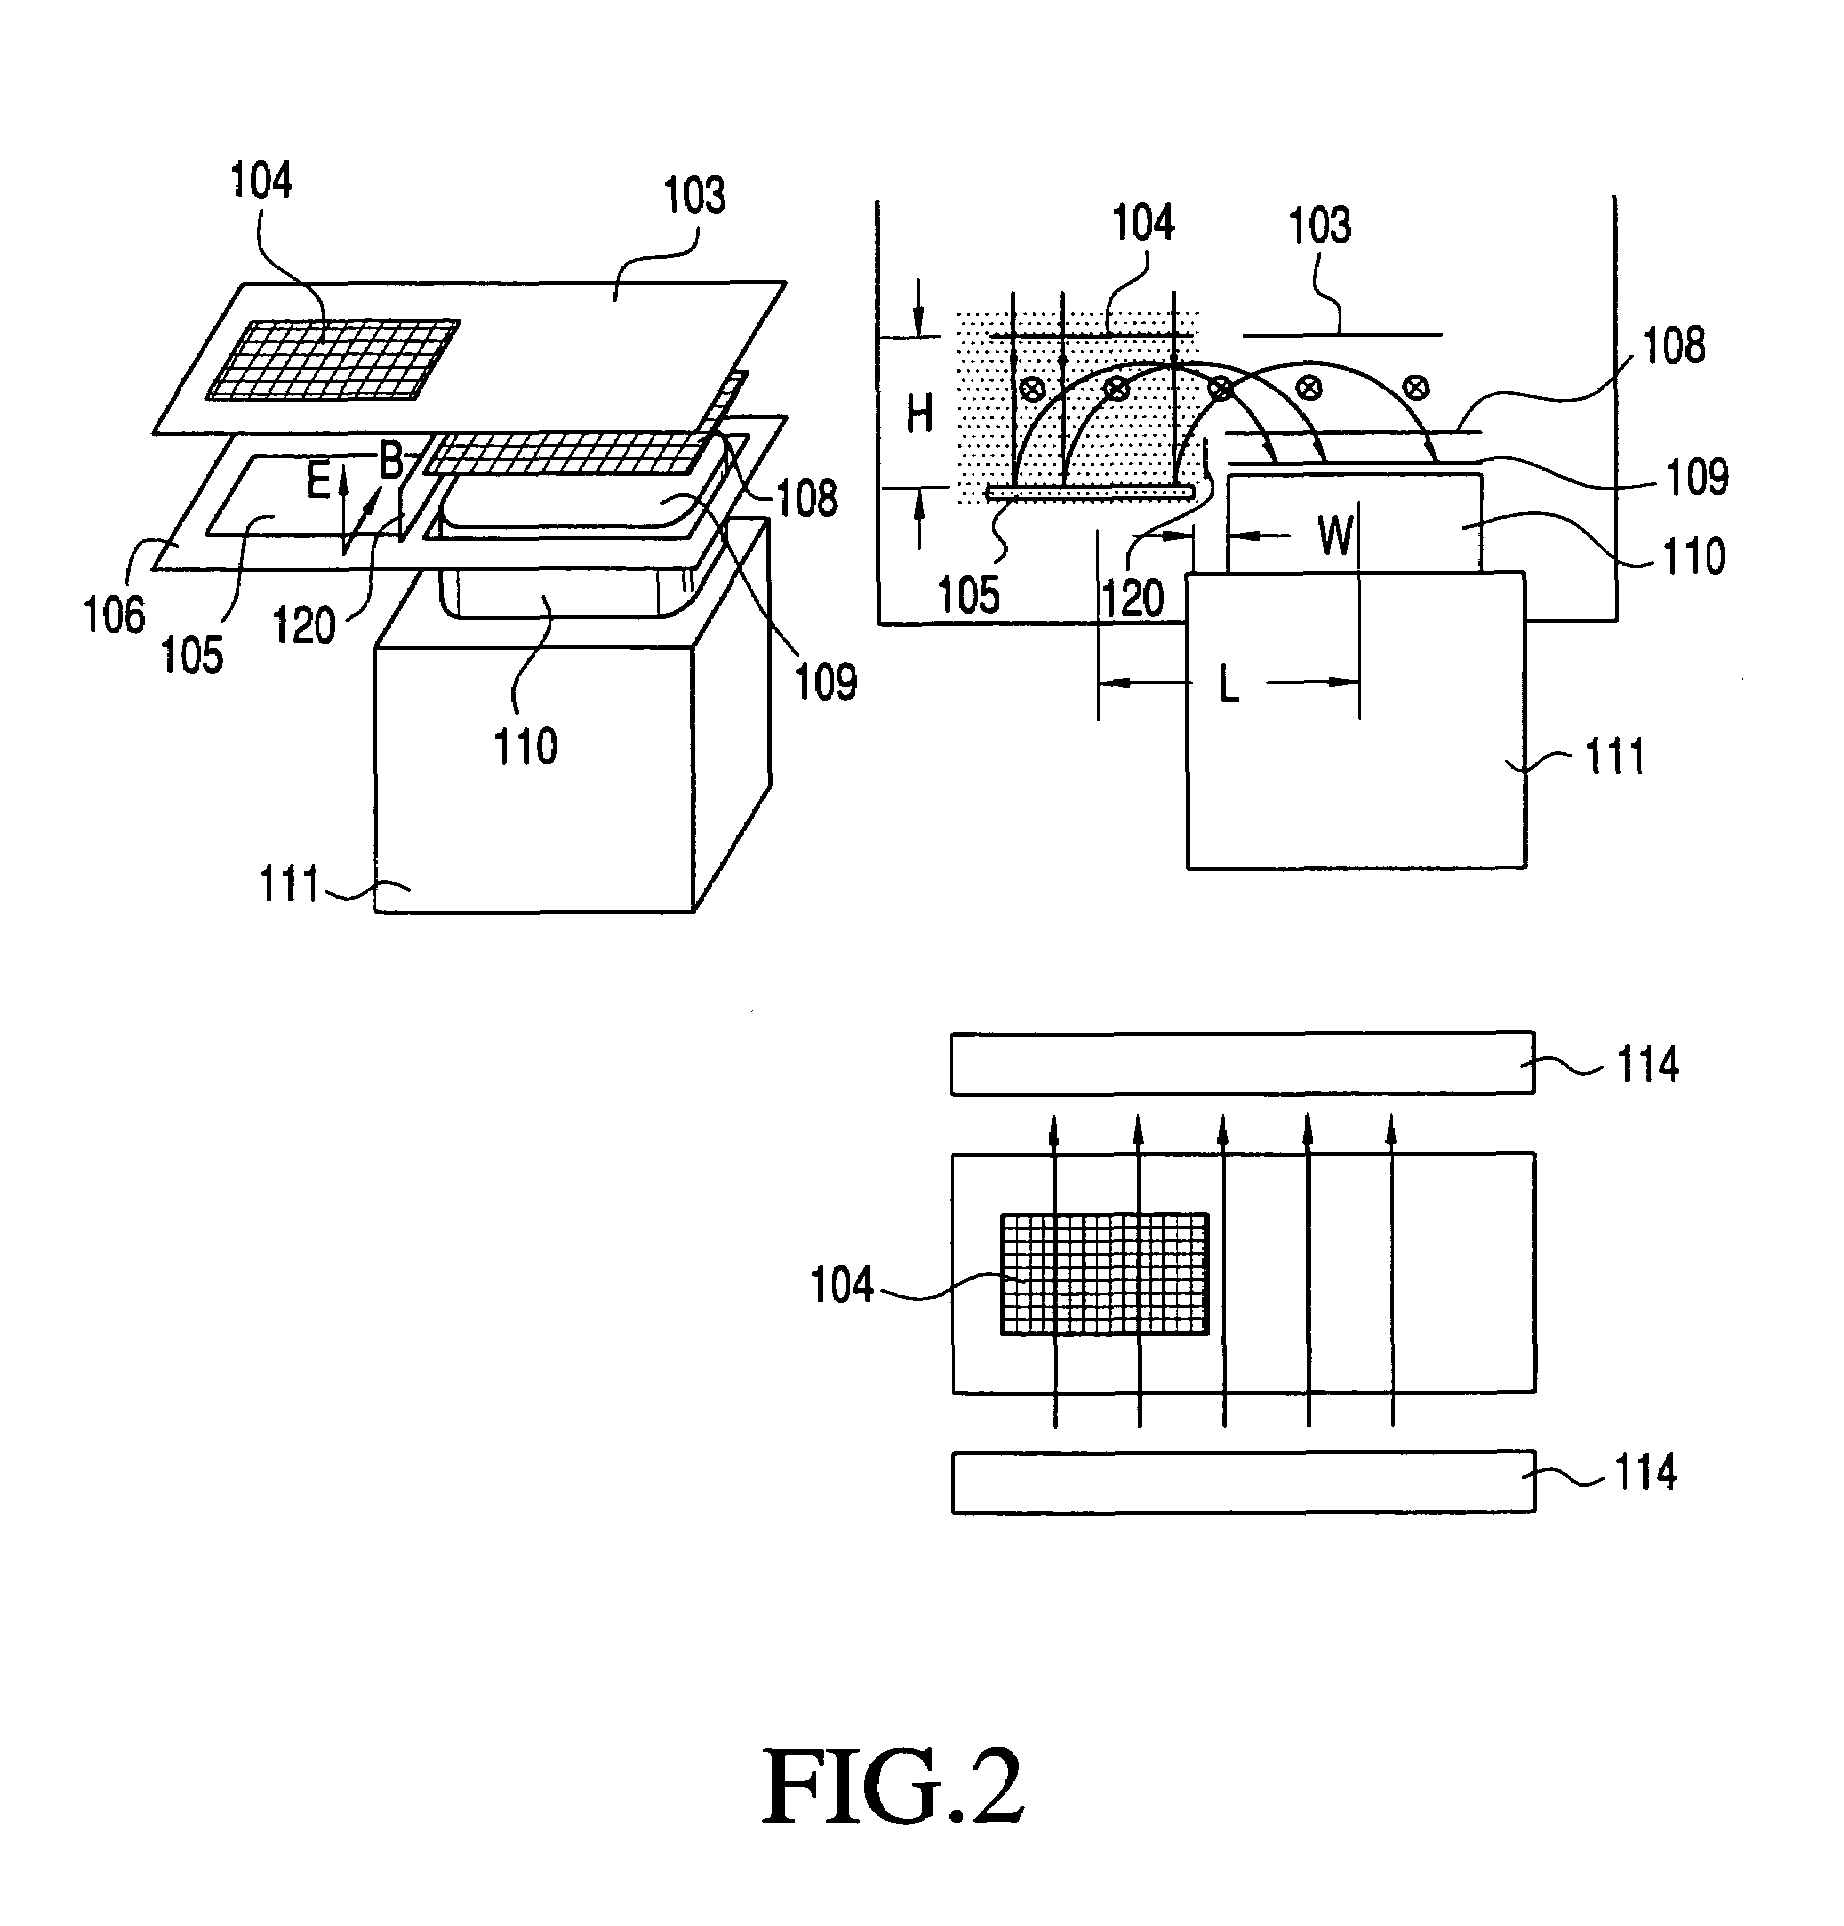 E×B ion detector for high efficiency time-of-flight mass spectrometers